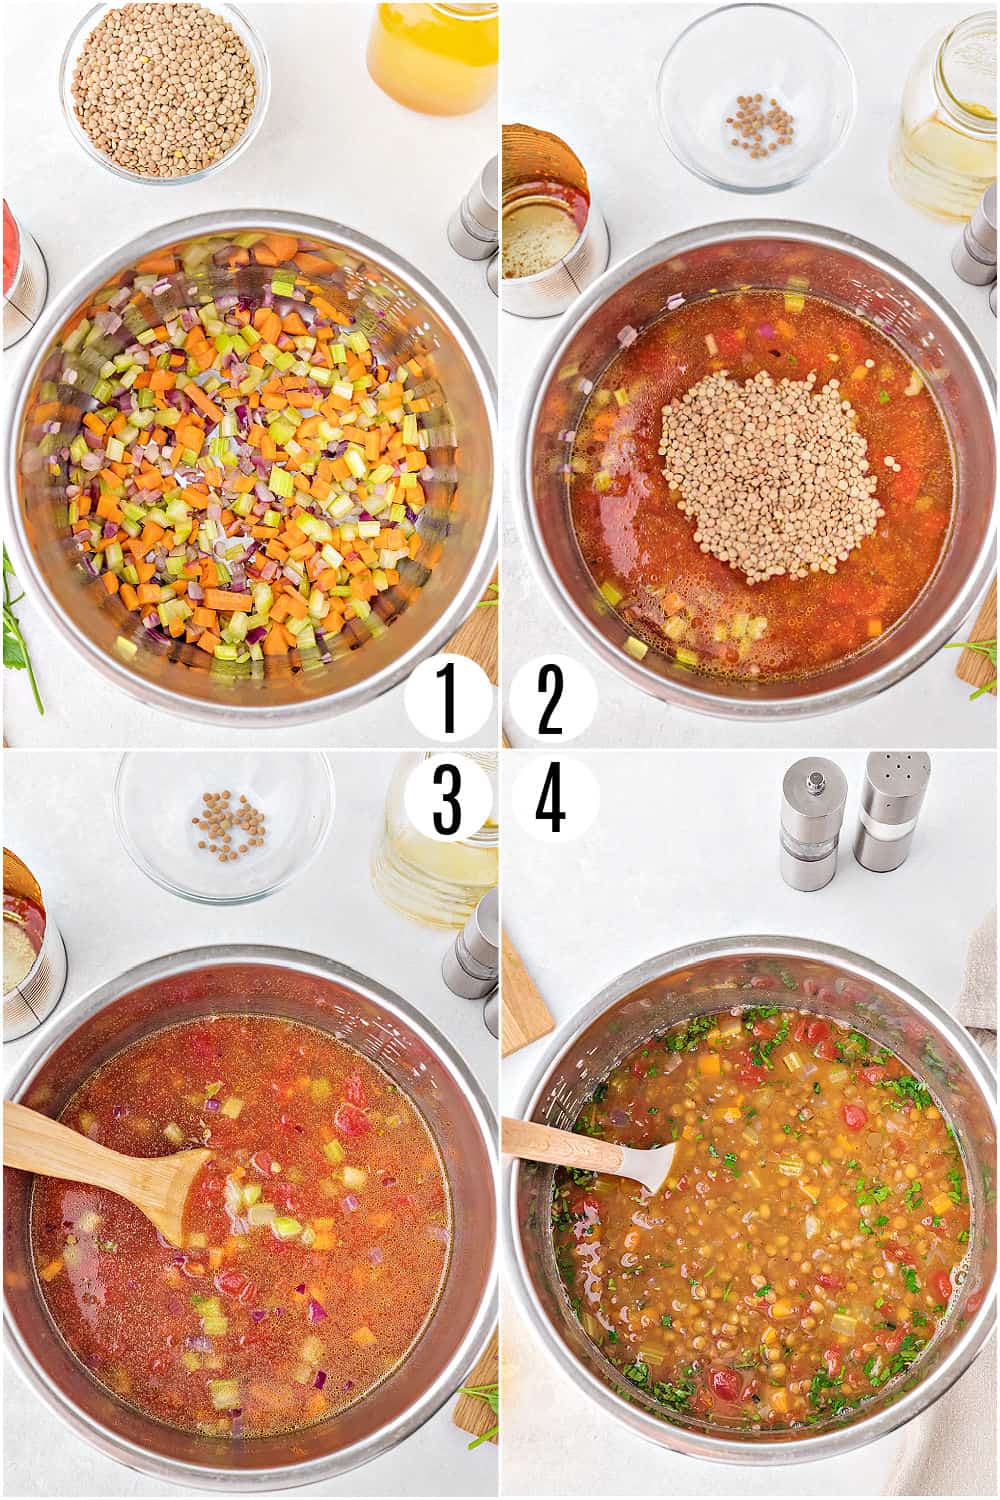 Step by step photos showing how to make lentil soup in the Instant Pot.